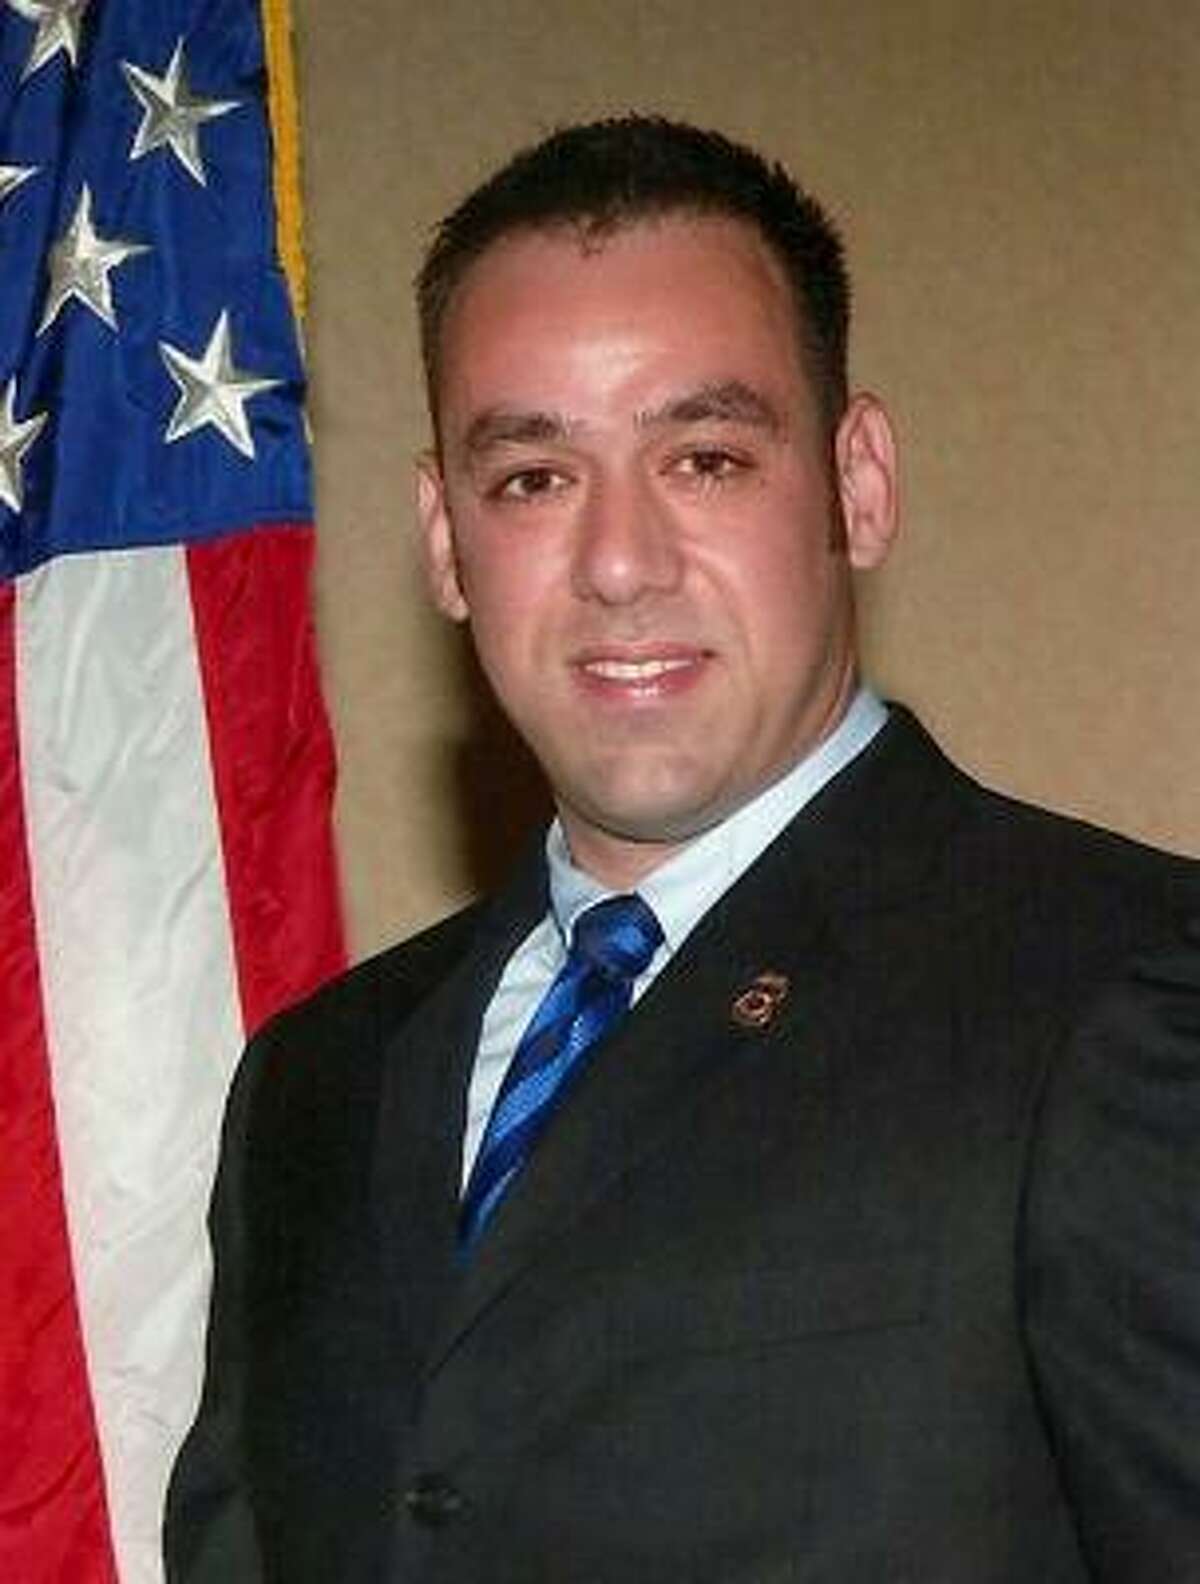 ICE Special Agent Jaime Zapata was killed in the line of duty Feb. 15 when he was ambushed while driving between Monterrey, Mexico, and Mexico City.